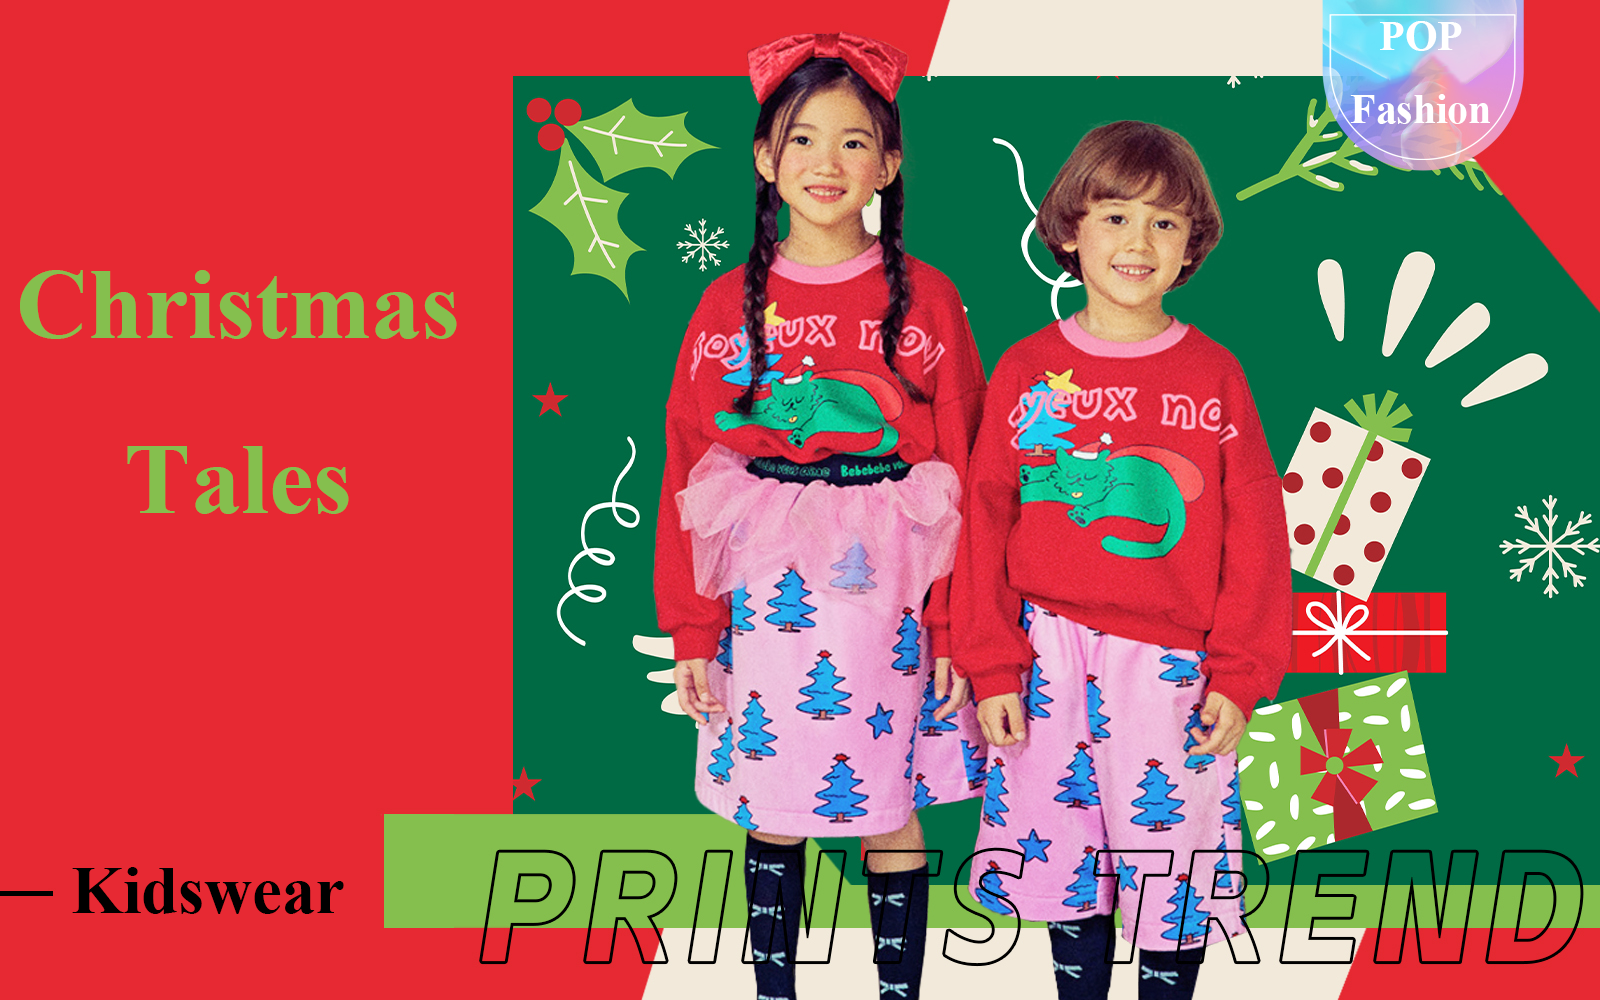 Christmas Tales -- The Pattern Trend for Kidswear